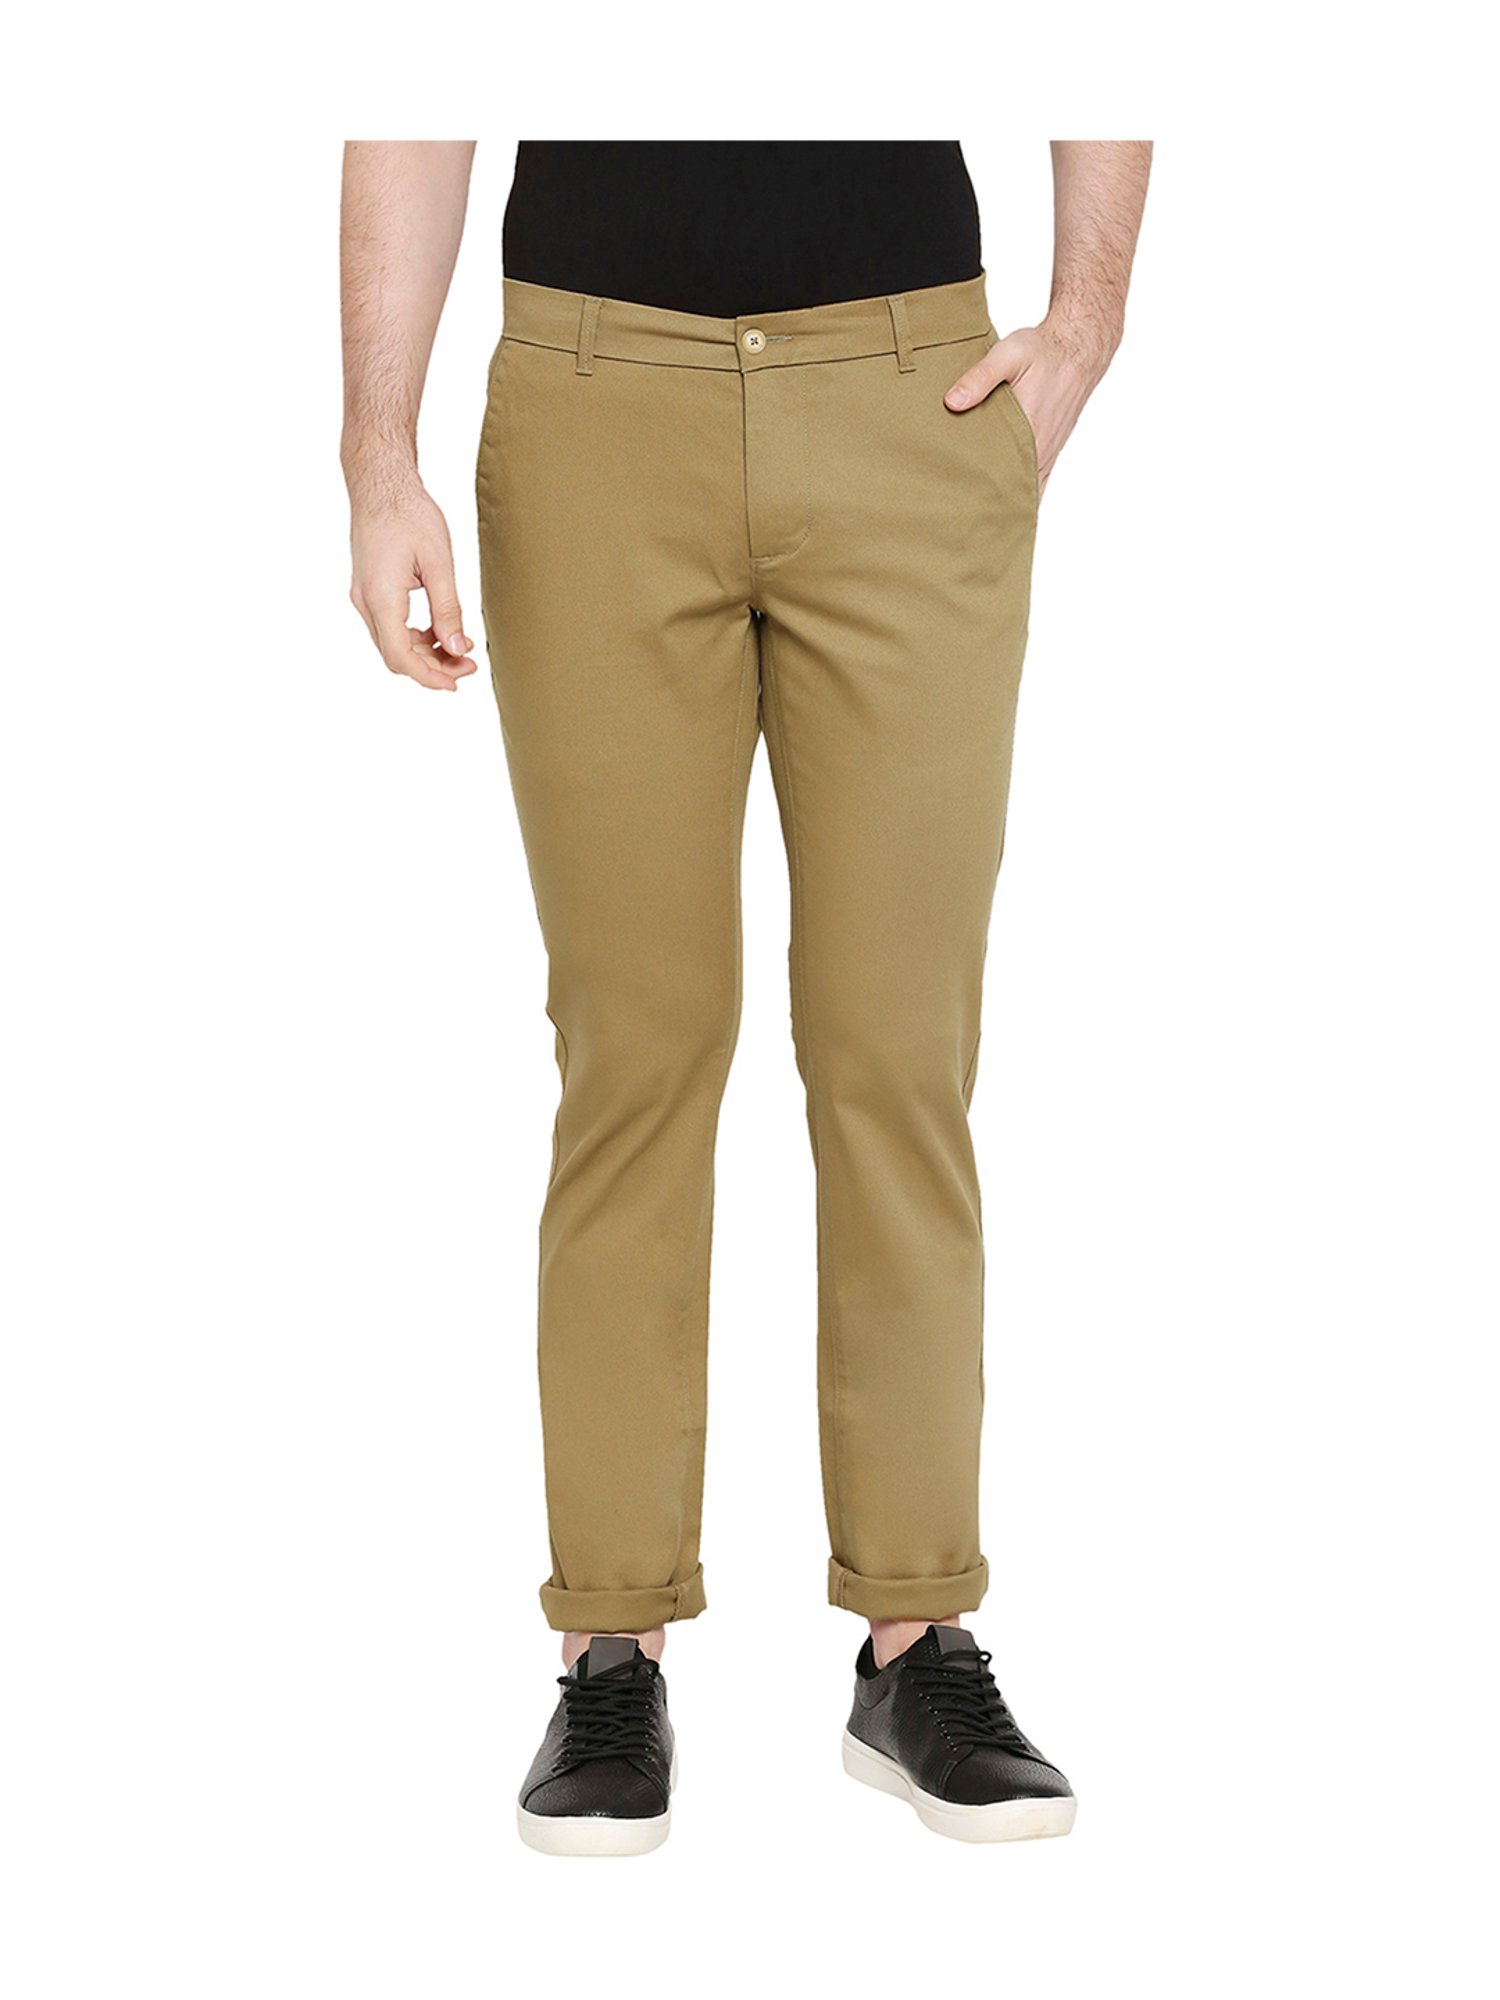 BASICS TAPERED FIT NIGHT OLIVE COTTON STRETCH TROUSERS22BTR48475